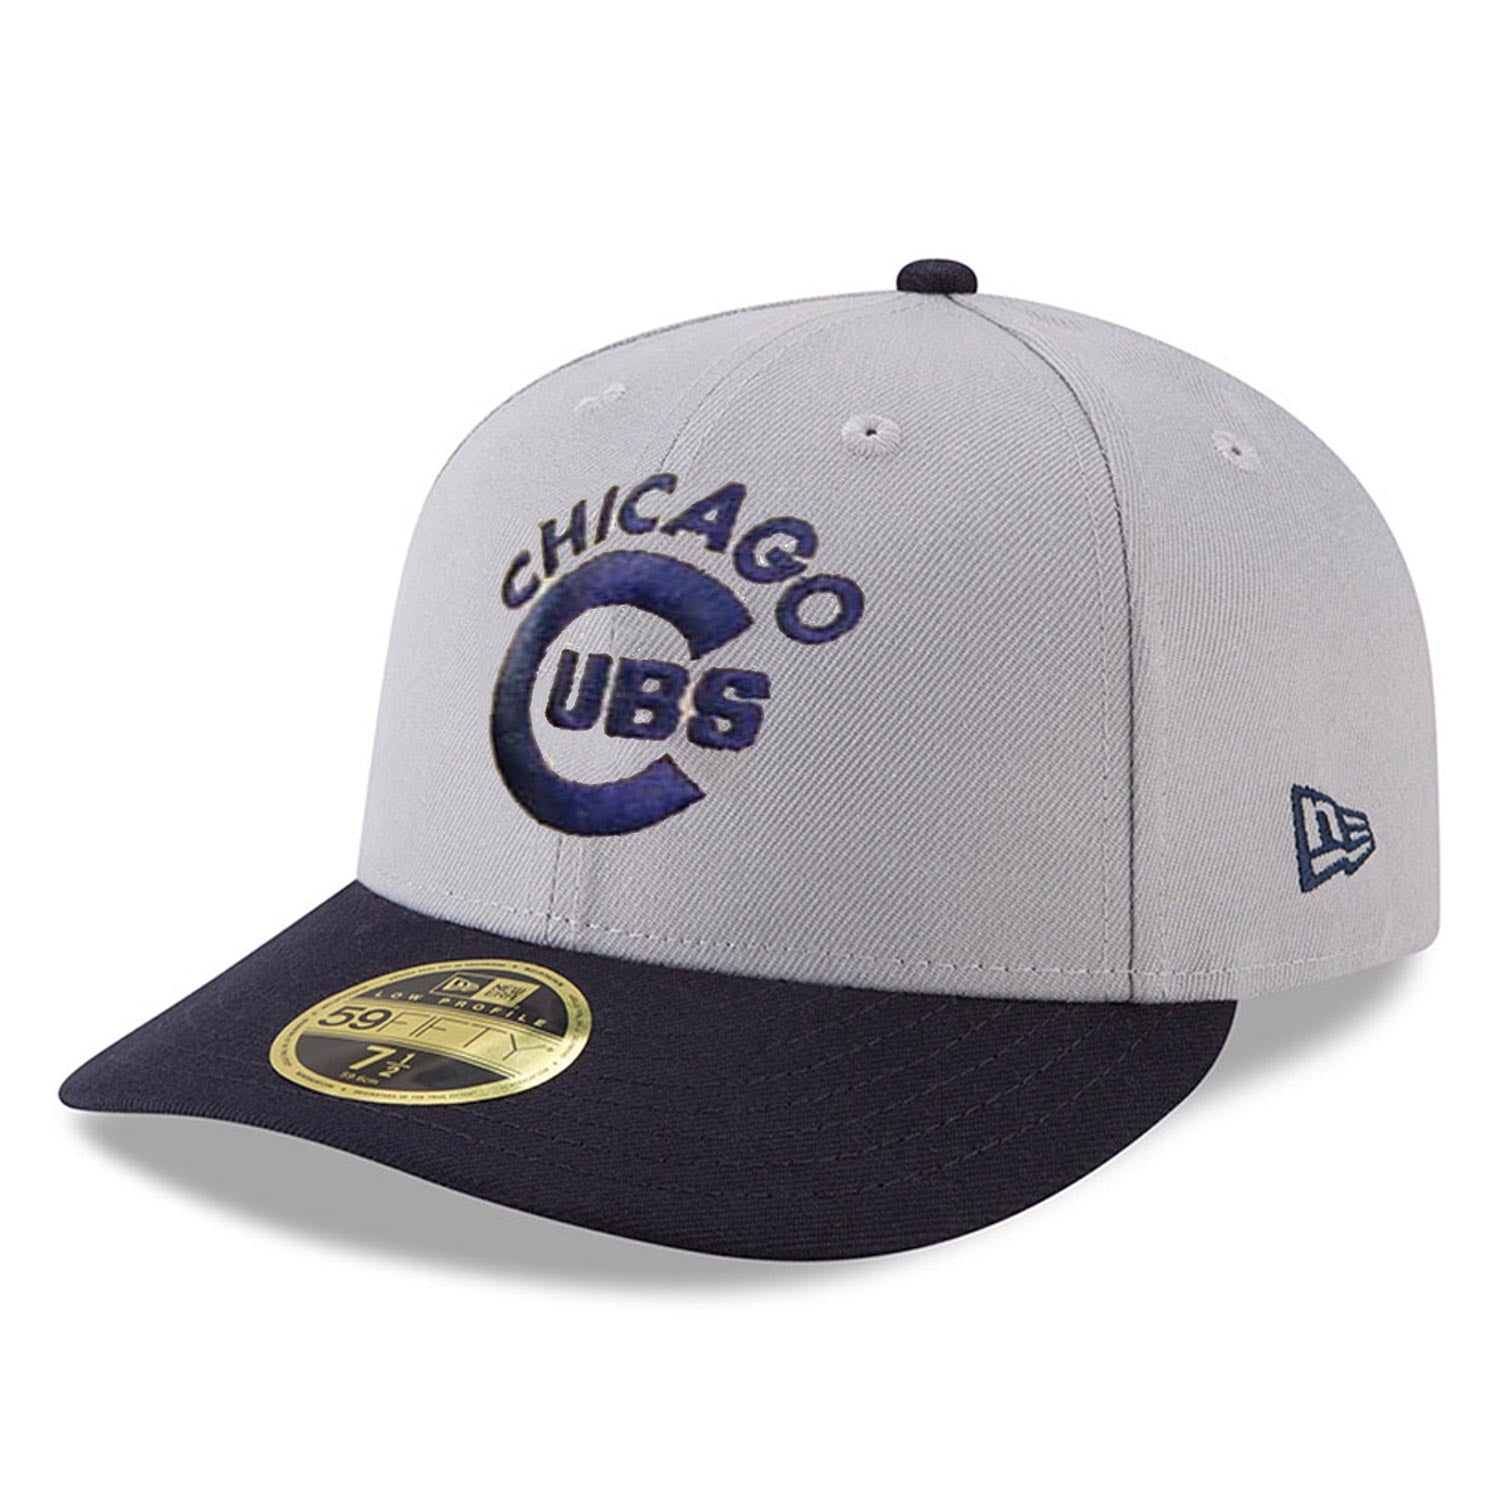 Chicago Cubs Grey Cooperstown Low Profile 59/50 Fitted Cap 7 1/4 = 22 3/4 in = 57.8 cm